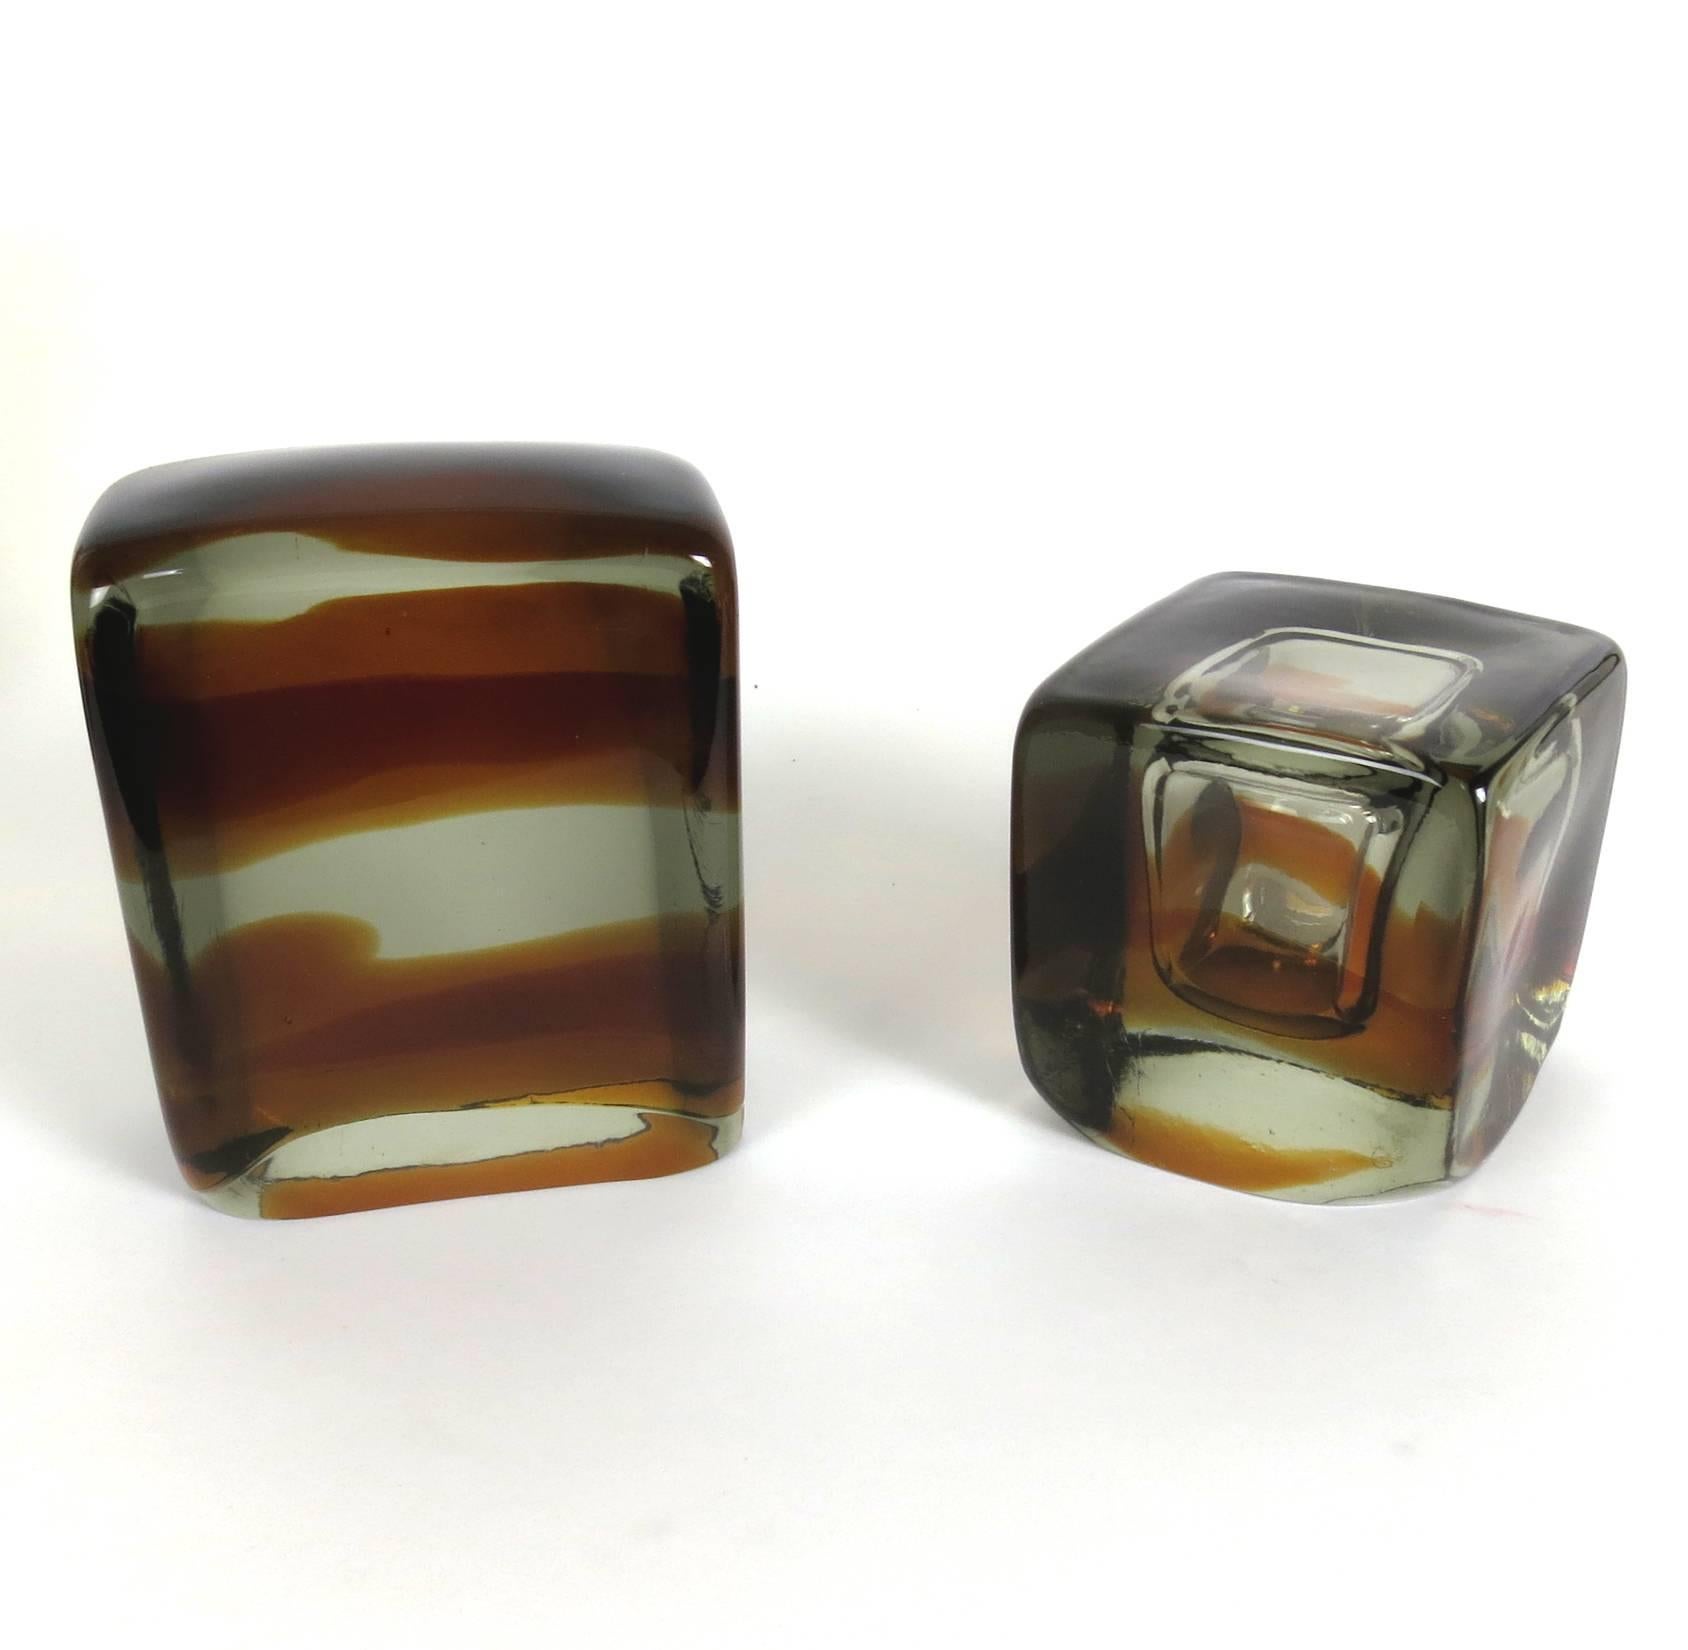 A pair of Murano glass bookends, unmarked, clear glass with amber glass. One is a cube with a bubble void, the other is a rectangular slab. Measures: 4.75" W x 4.75" D x 4.75" H; 6" W x 3" D x 7" H.